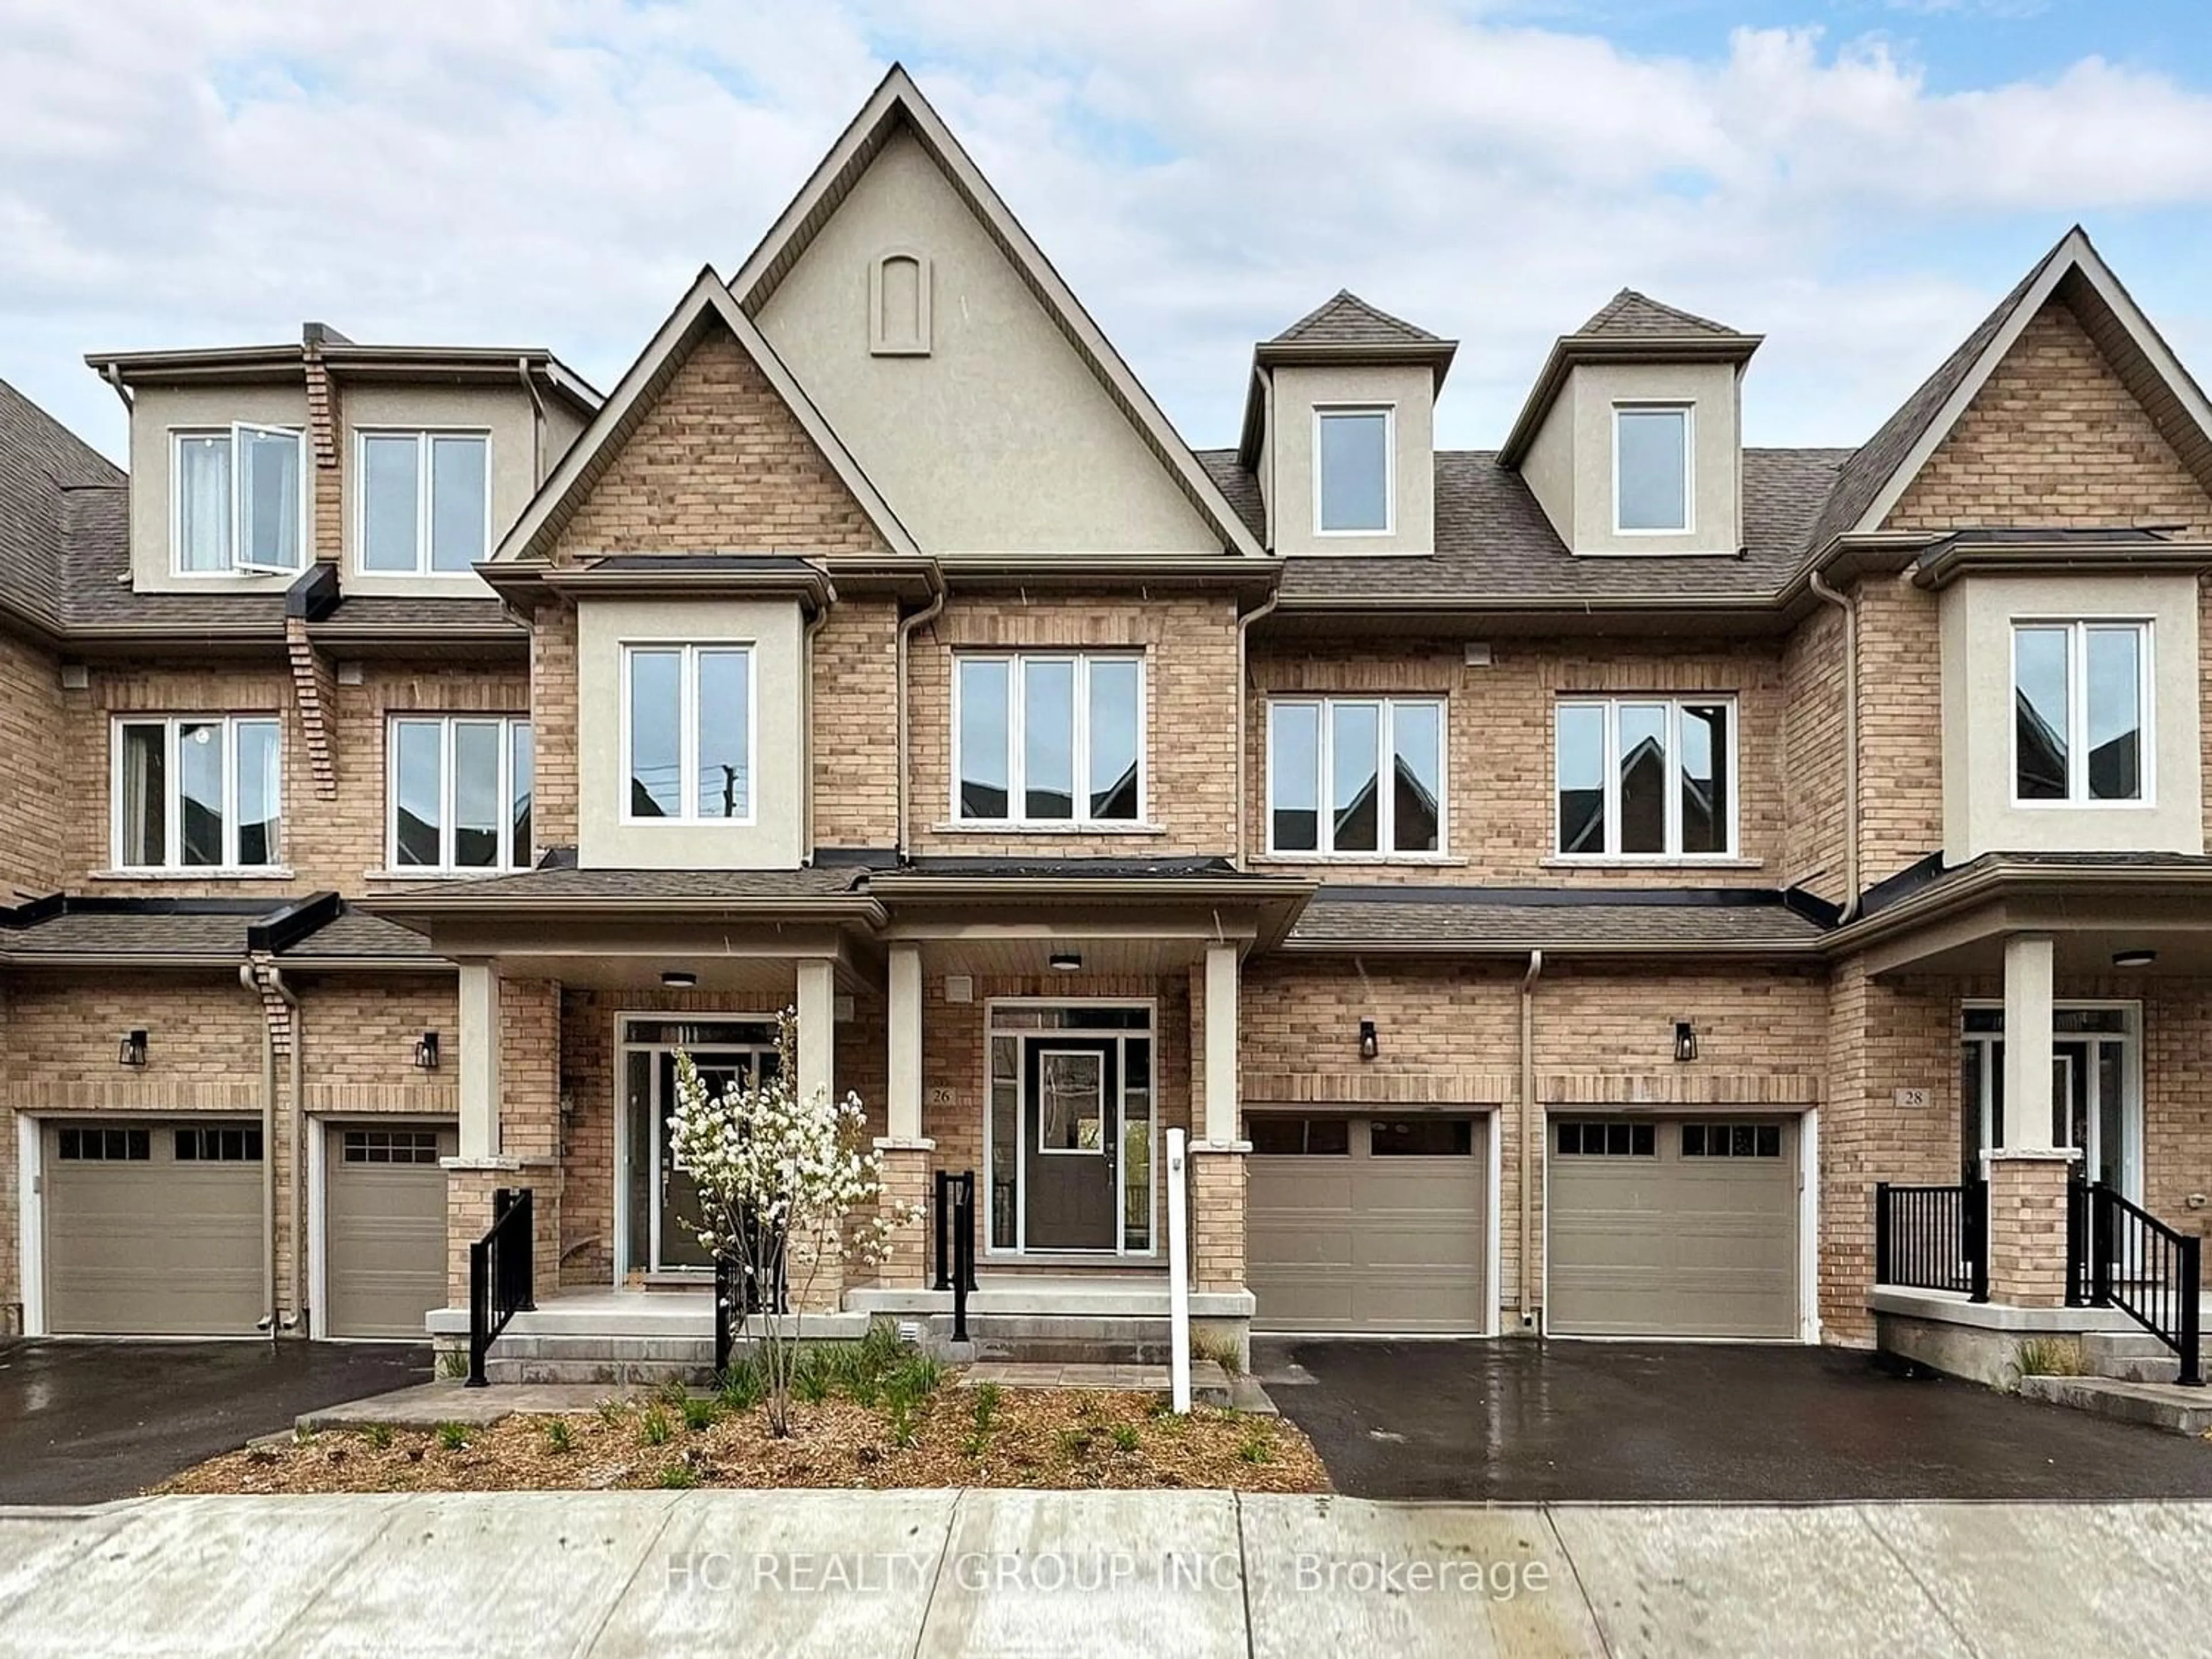 Home with brick exterior material for 26 Yans Way, Markham Ontario L3R 0J8